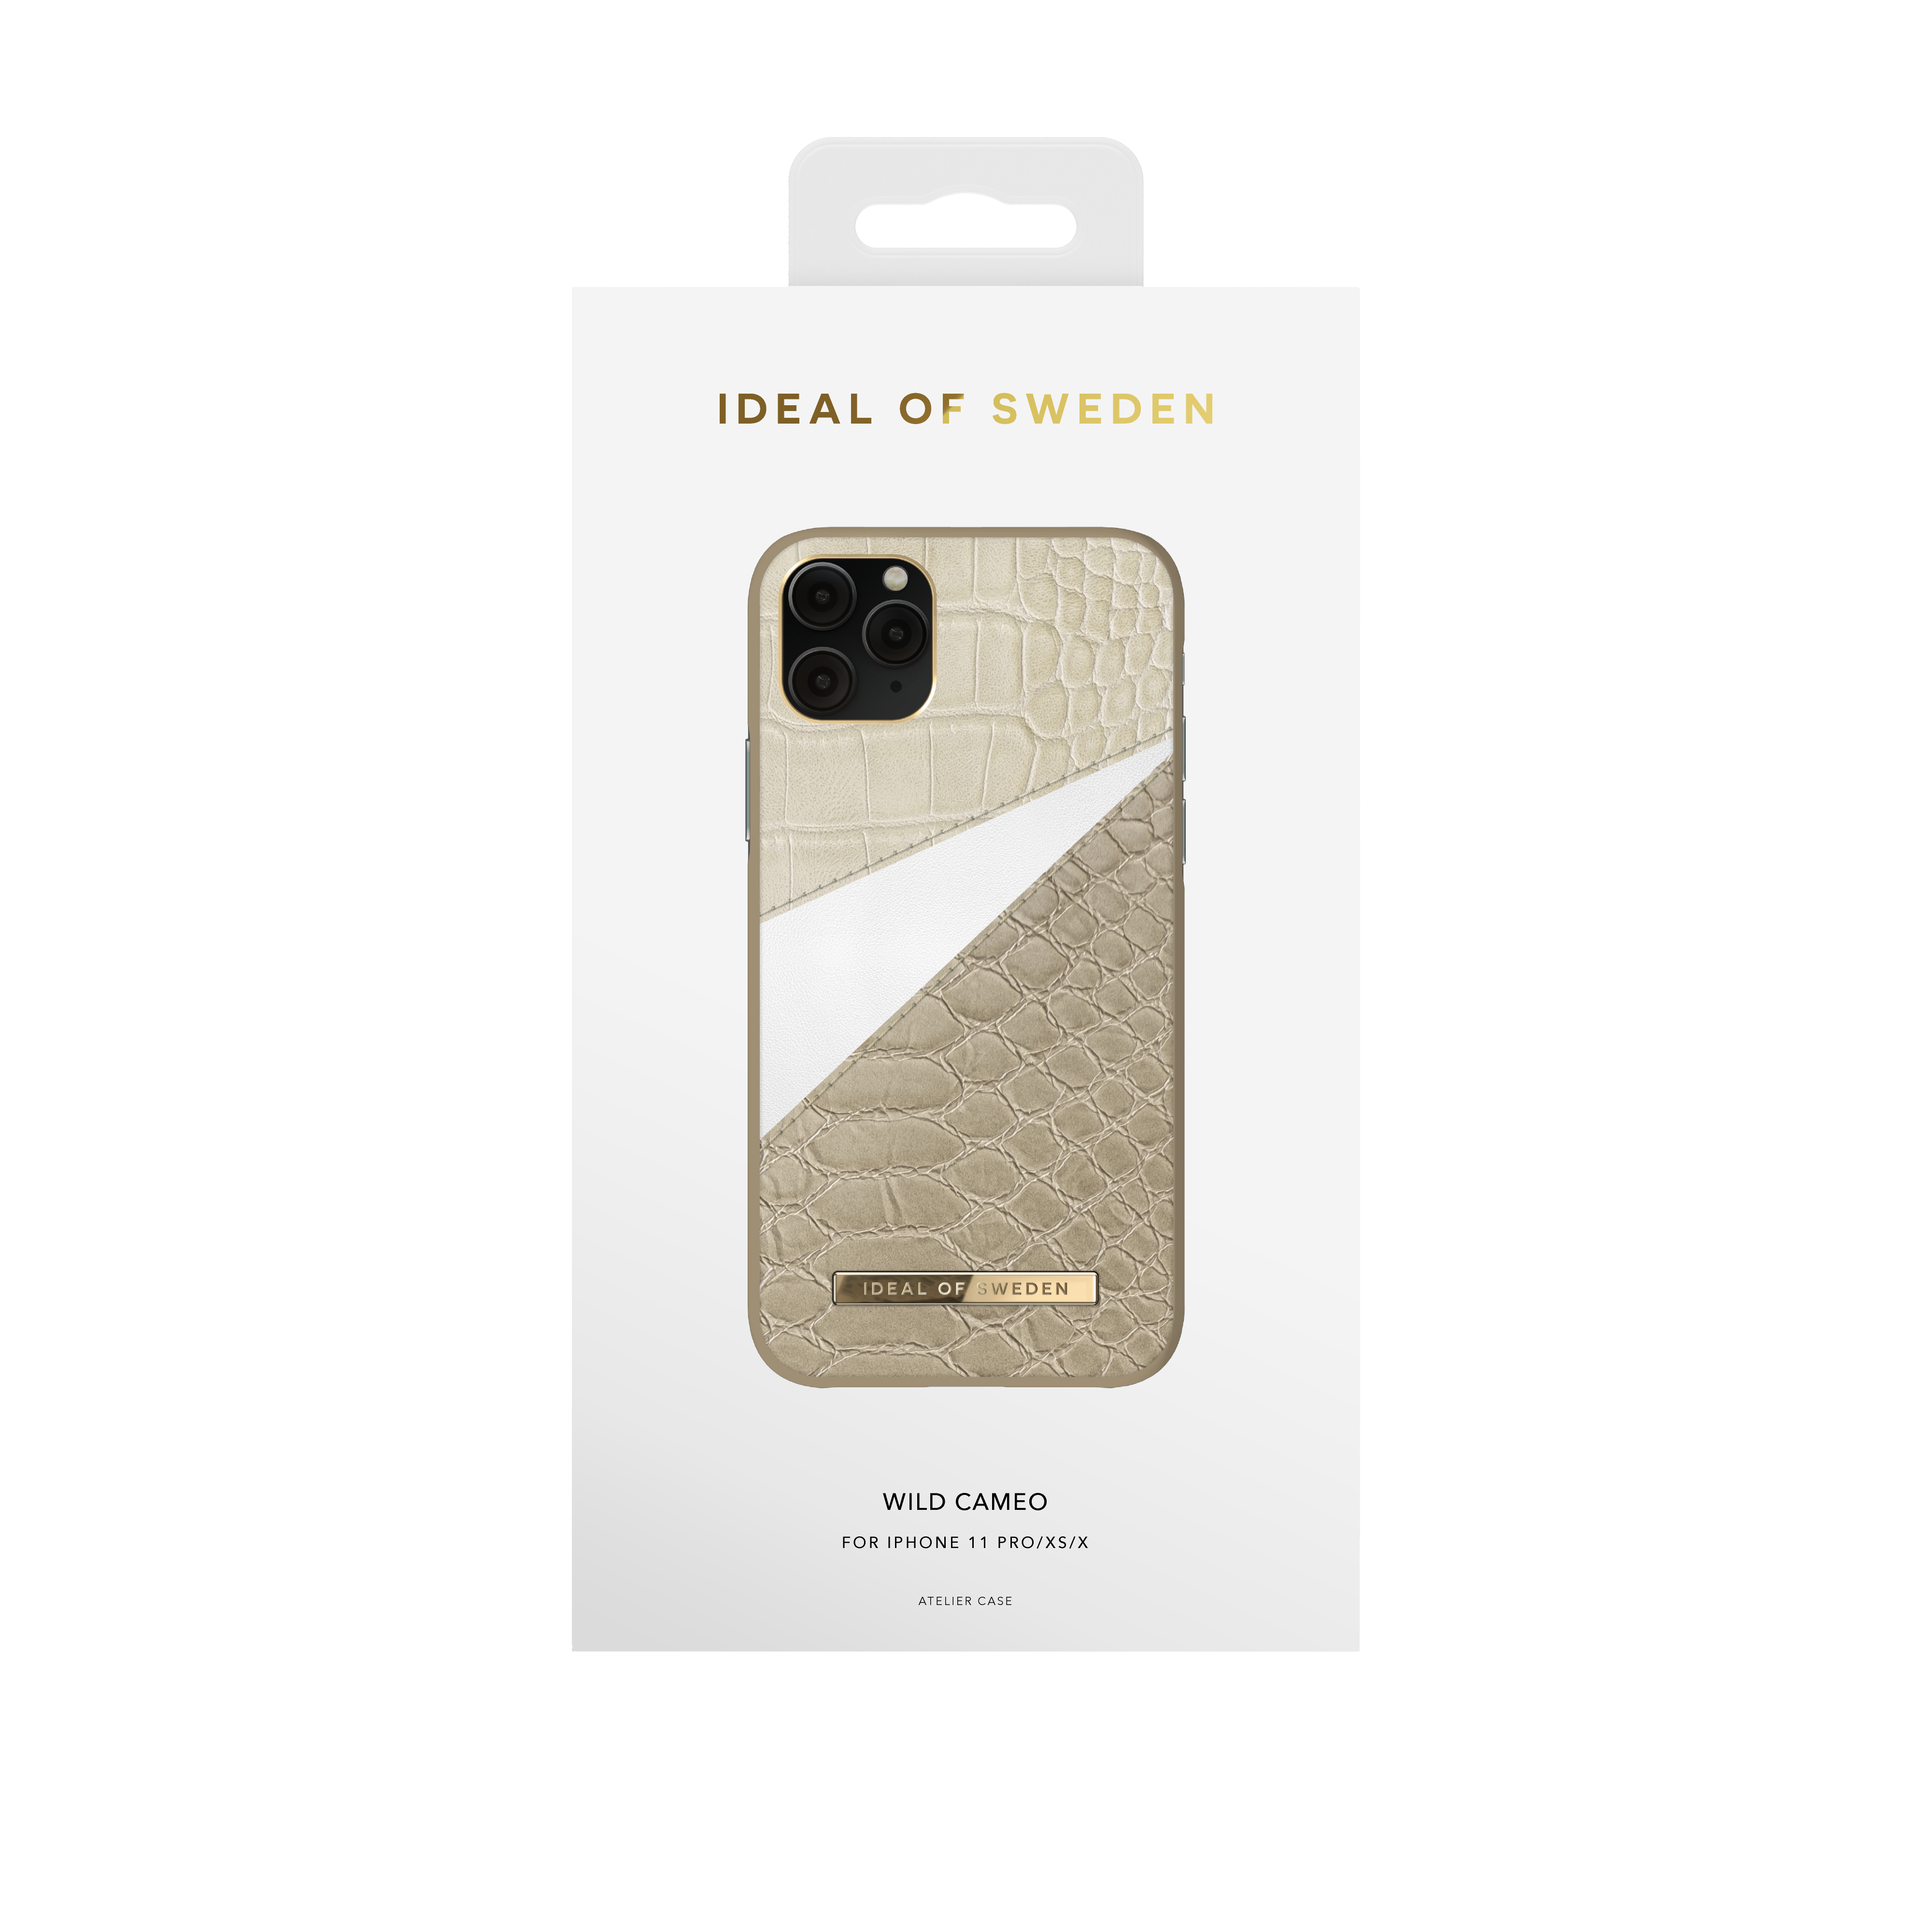 IDEAL OF 11 Pro, Apple, Cameo iPhone Wild Backcover, IDACAW20-1958-246, X, iPhone XS, SWEDEN iPhone